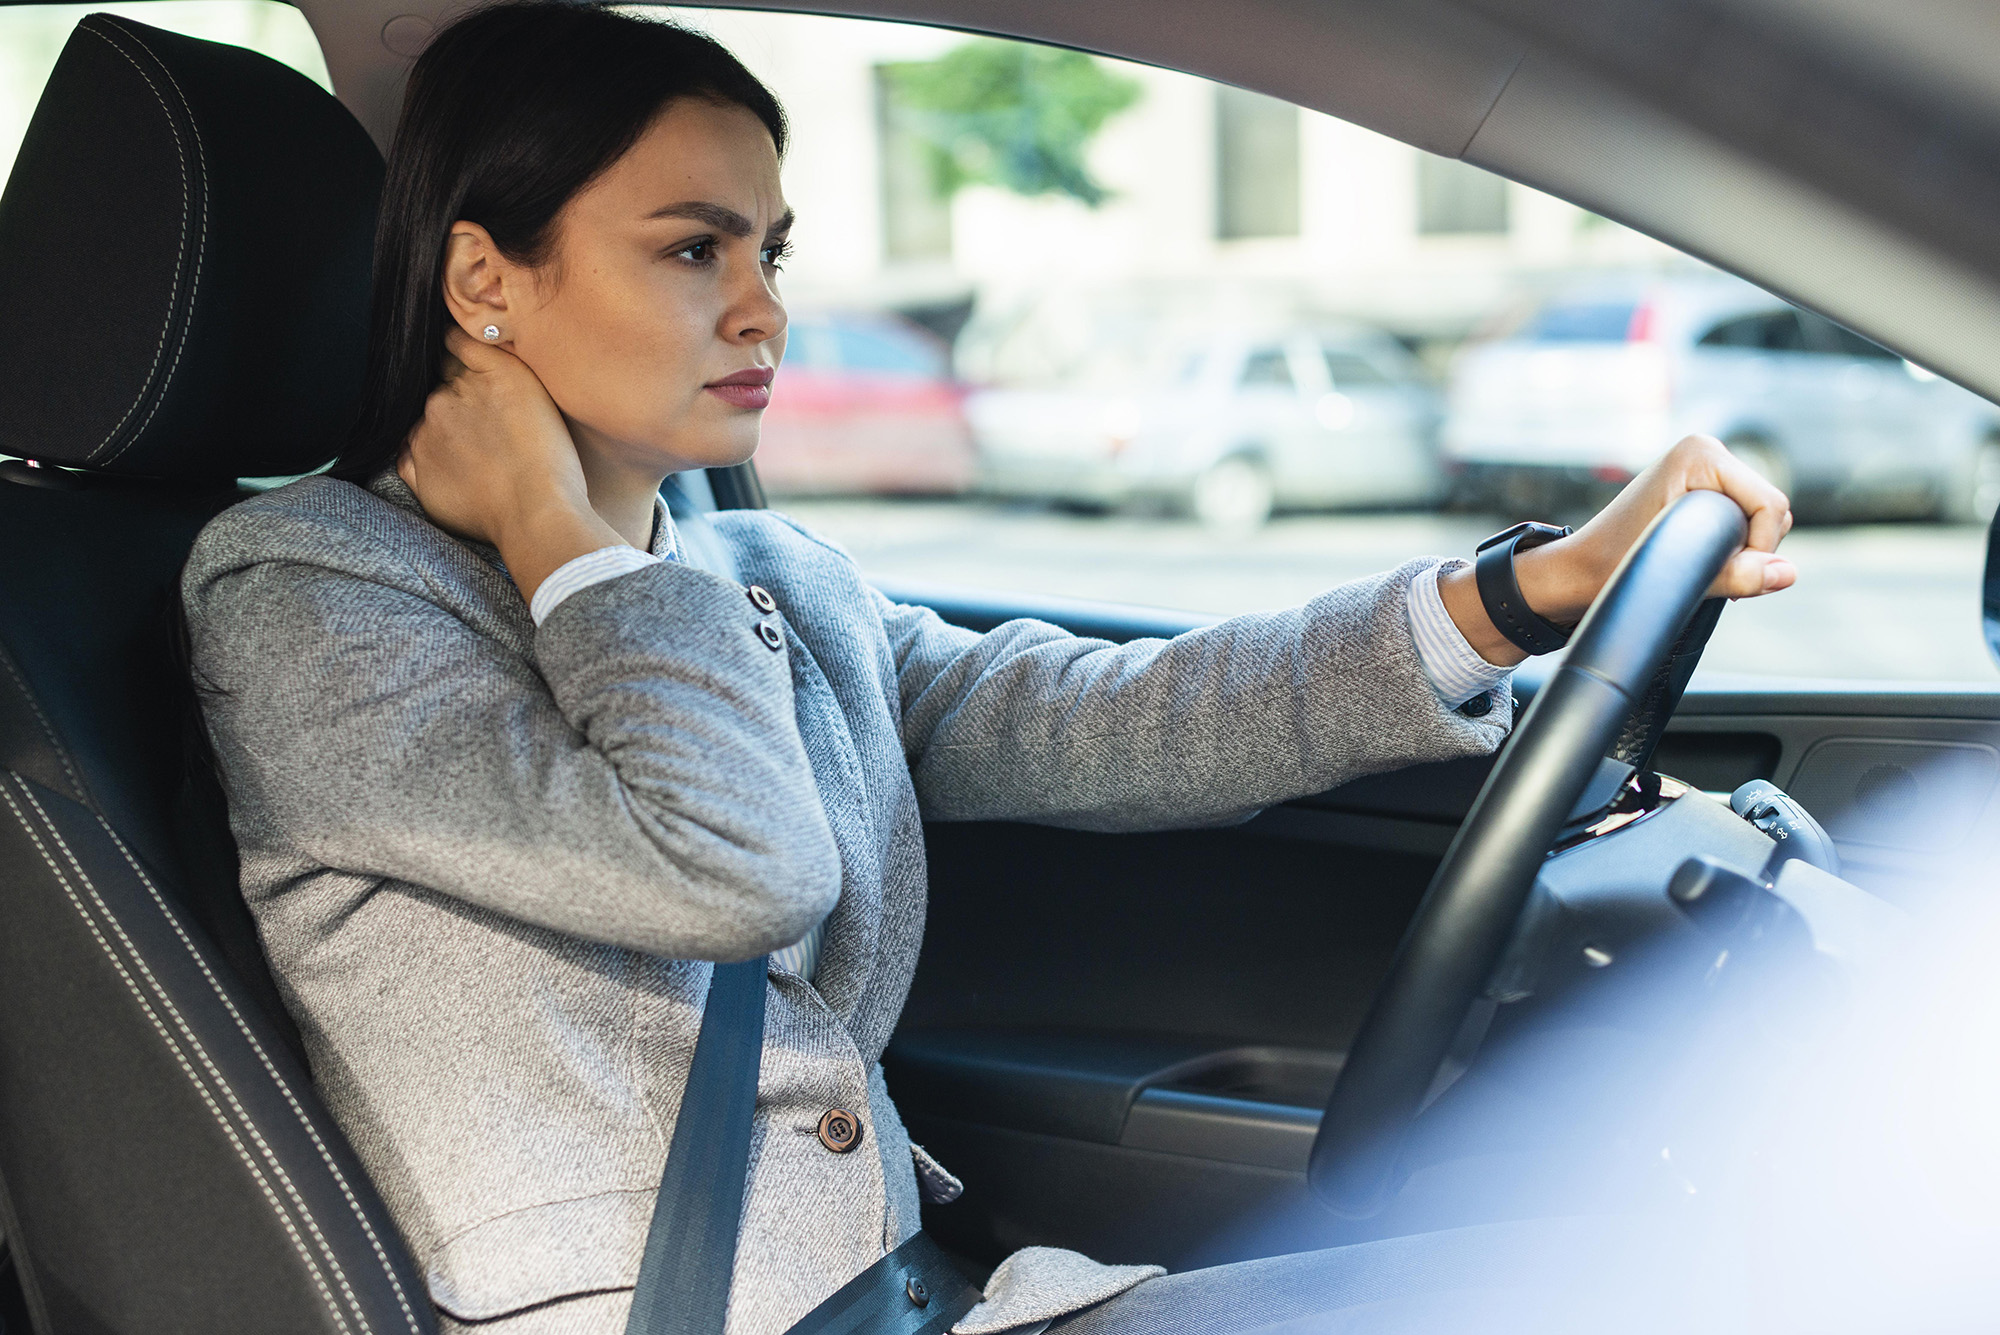 5 Tips to Prevent Back Pain While Driving